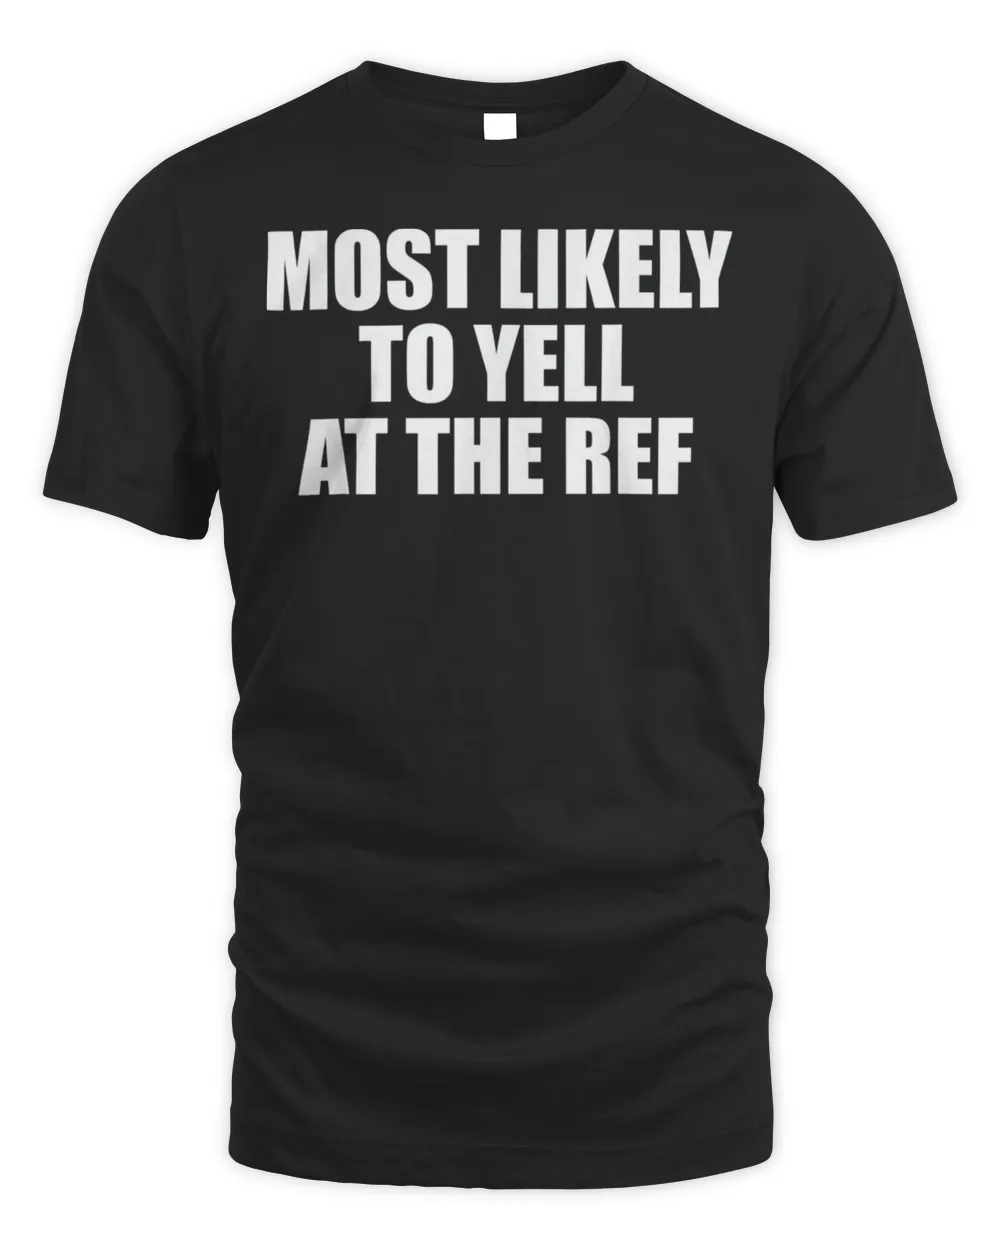 Most likely to yell at the ref Shirt